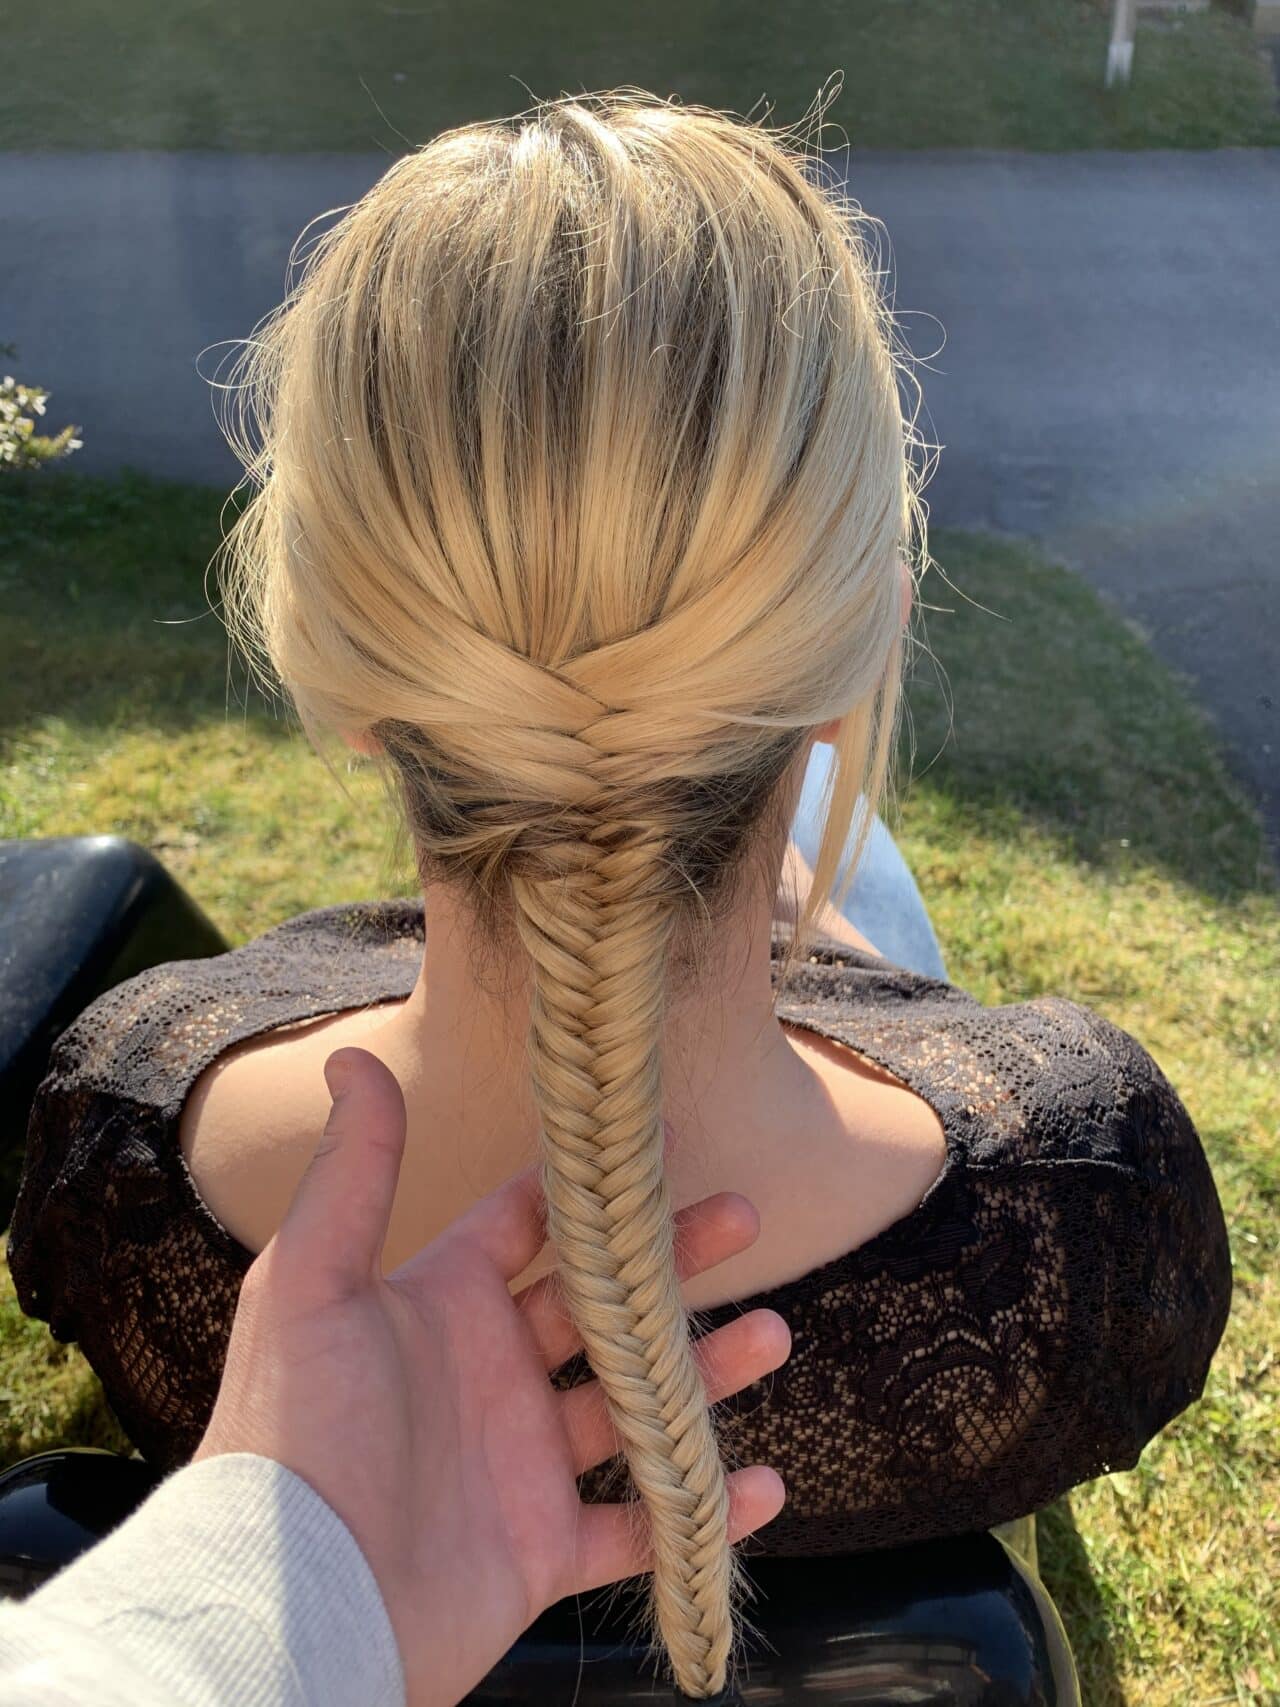 Hand Holding Braid On Blond Woman In Black Lace Top